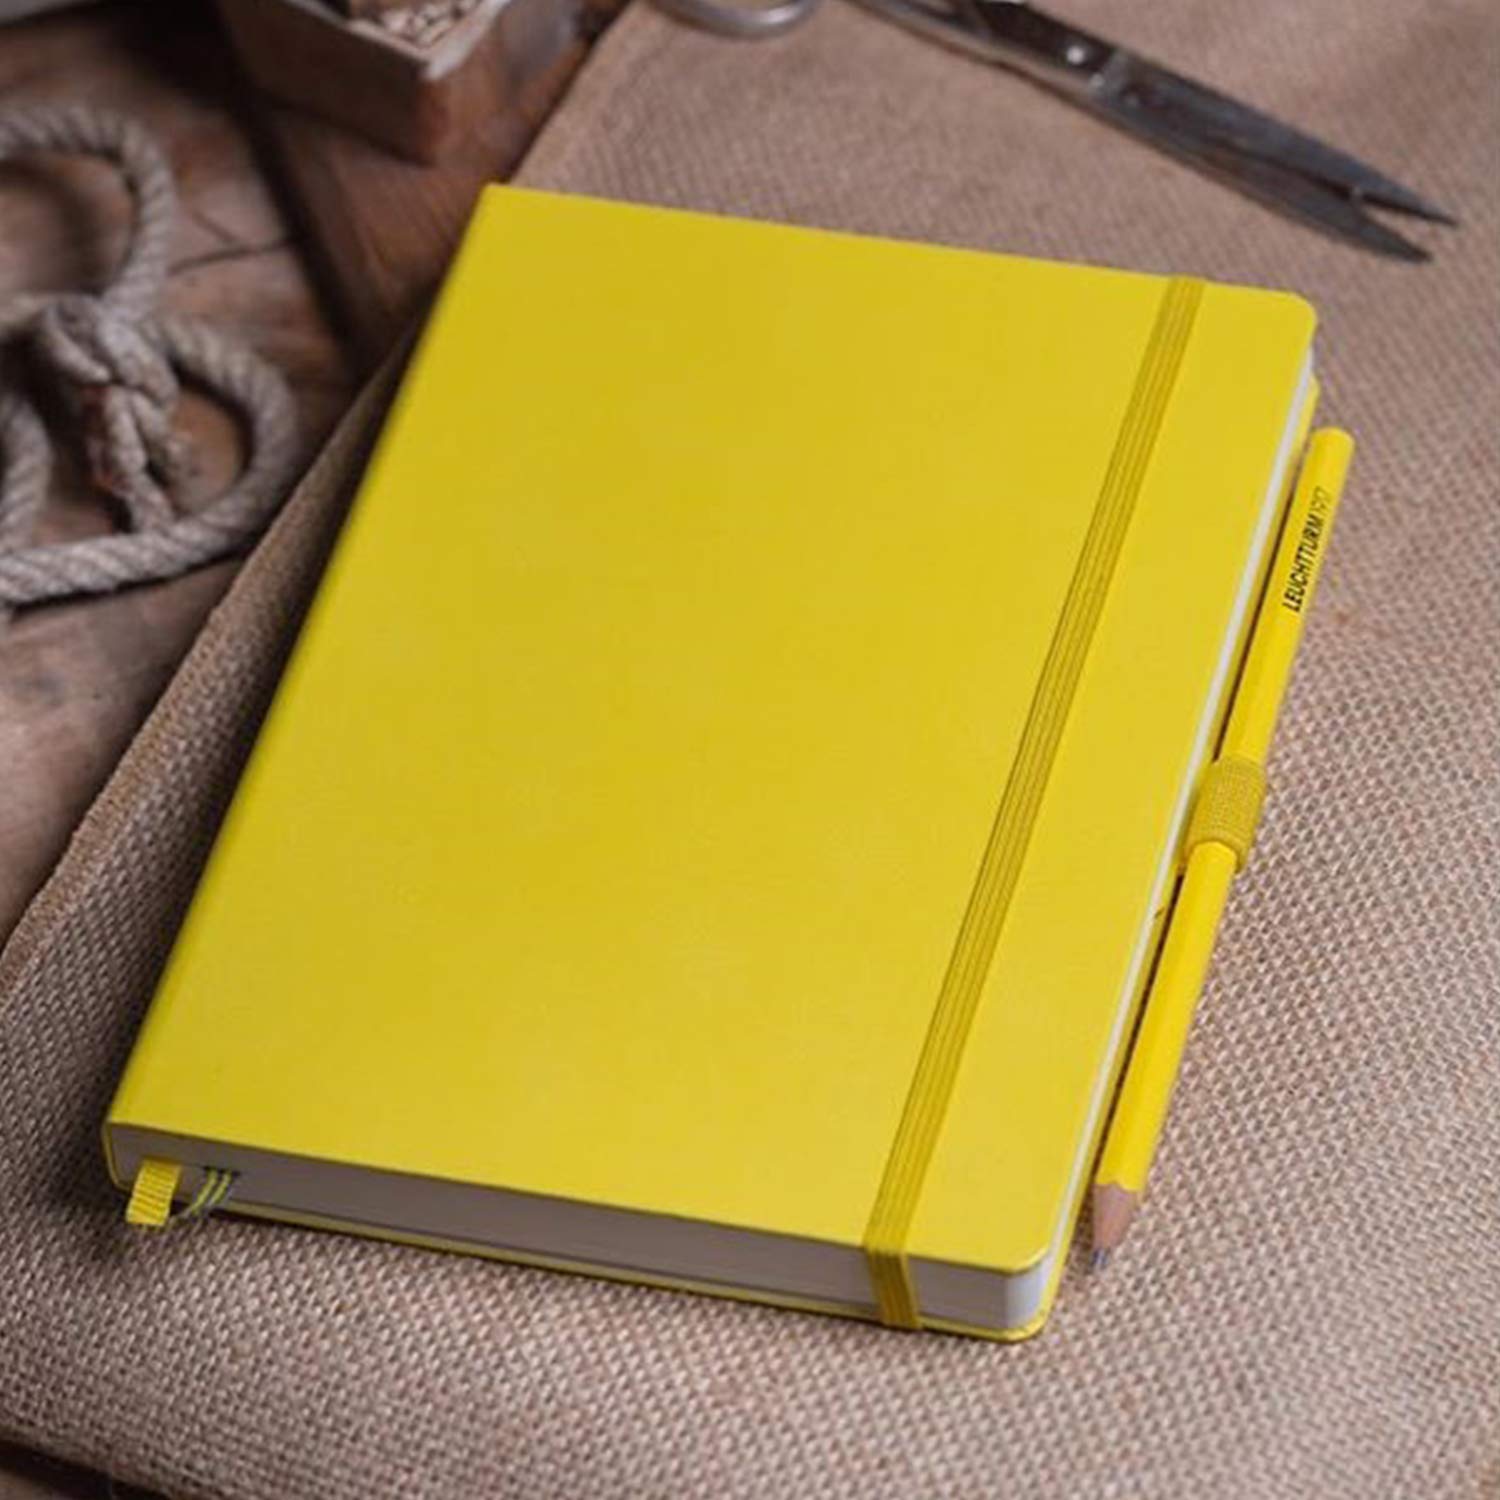 Leuchtturm1917 Medium A5 Dotted Hardcover Notebook (Orange) - 249 Numbered  Pages